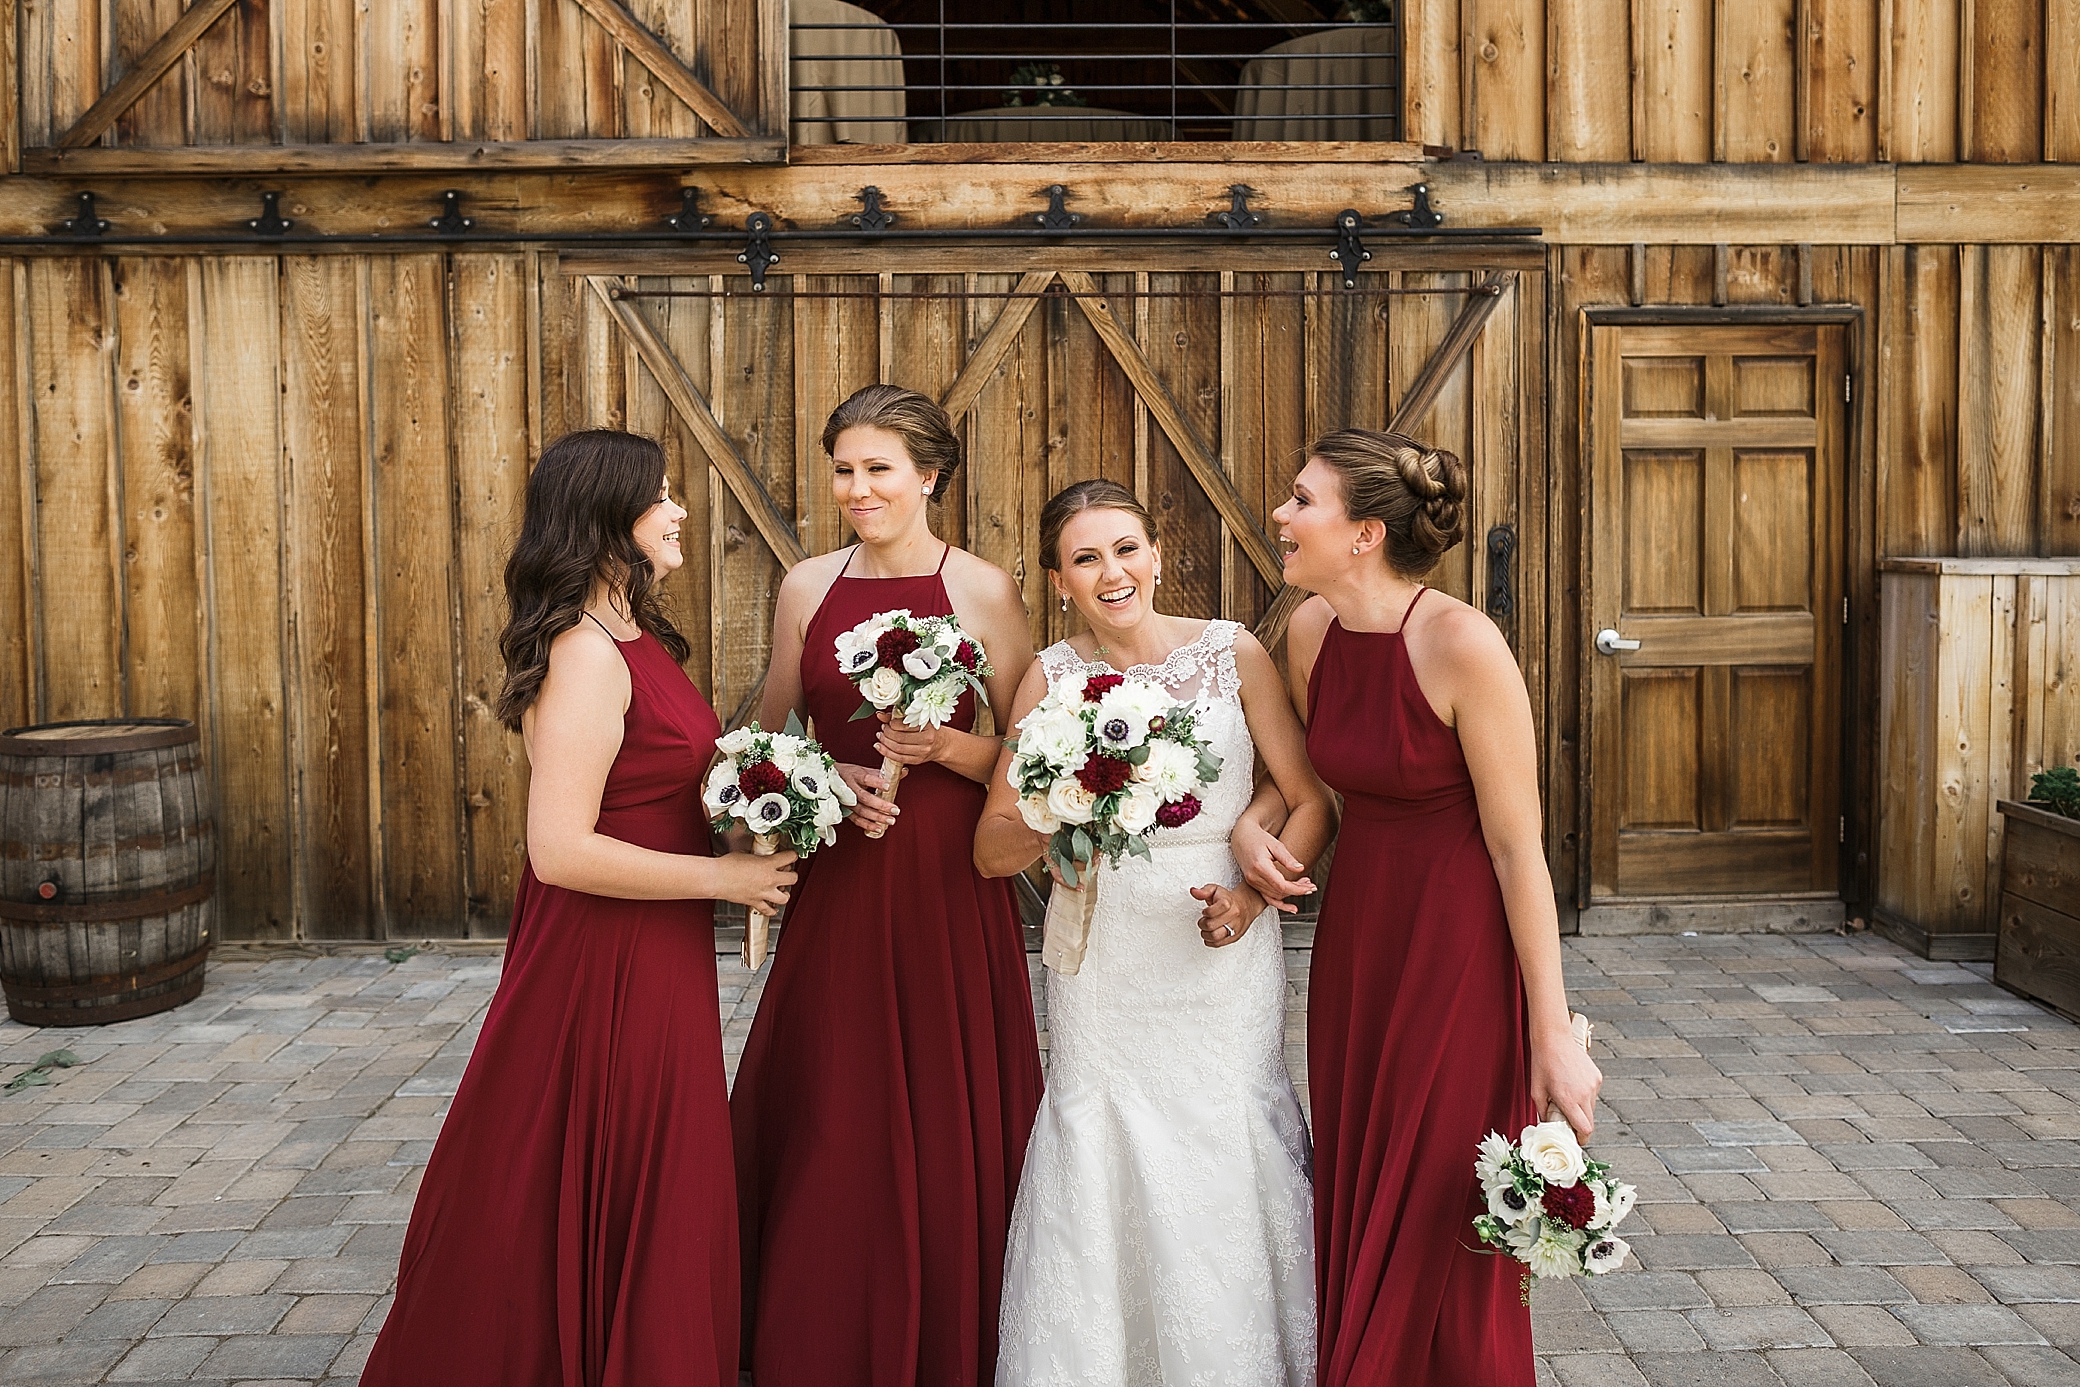 Wedding party portraits at the Cattle Barn in Cle Elum, WA | Megan Montalvo Photography